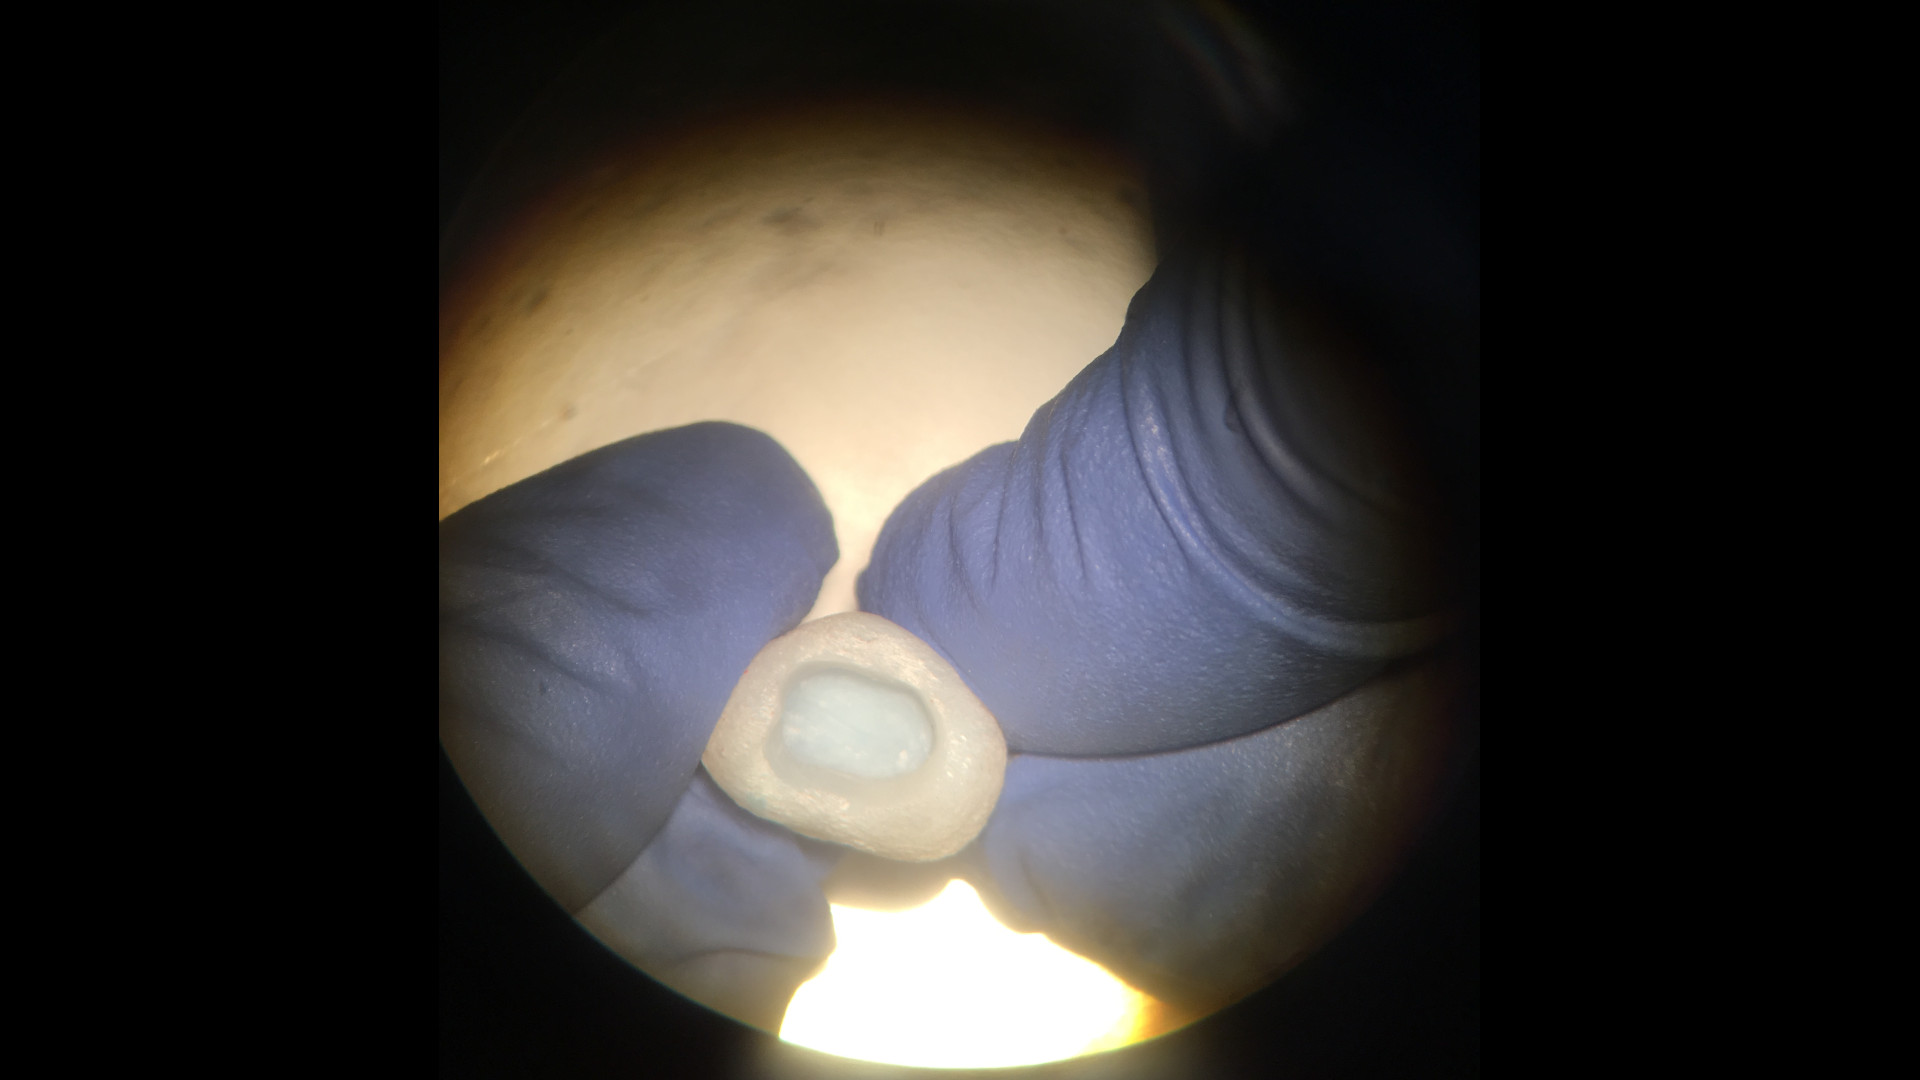 A 3D printed molar as viewed by a student under a clinical microscope.